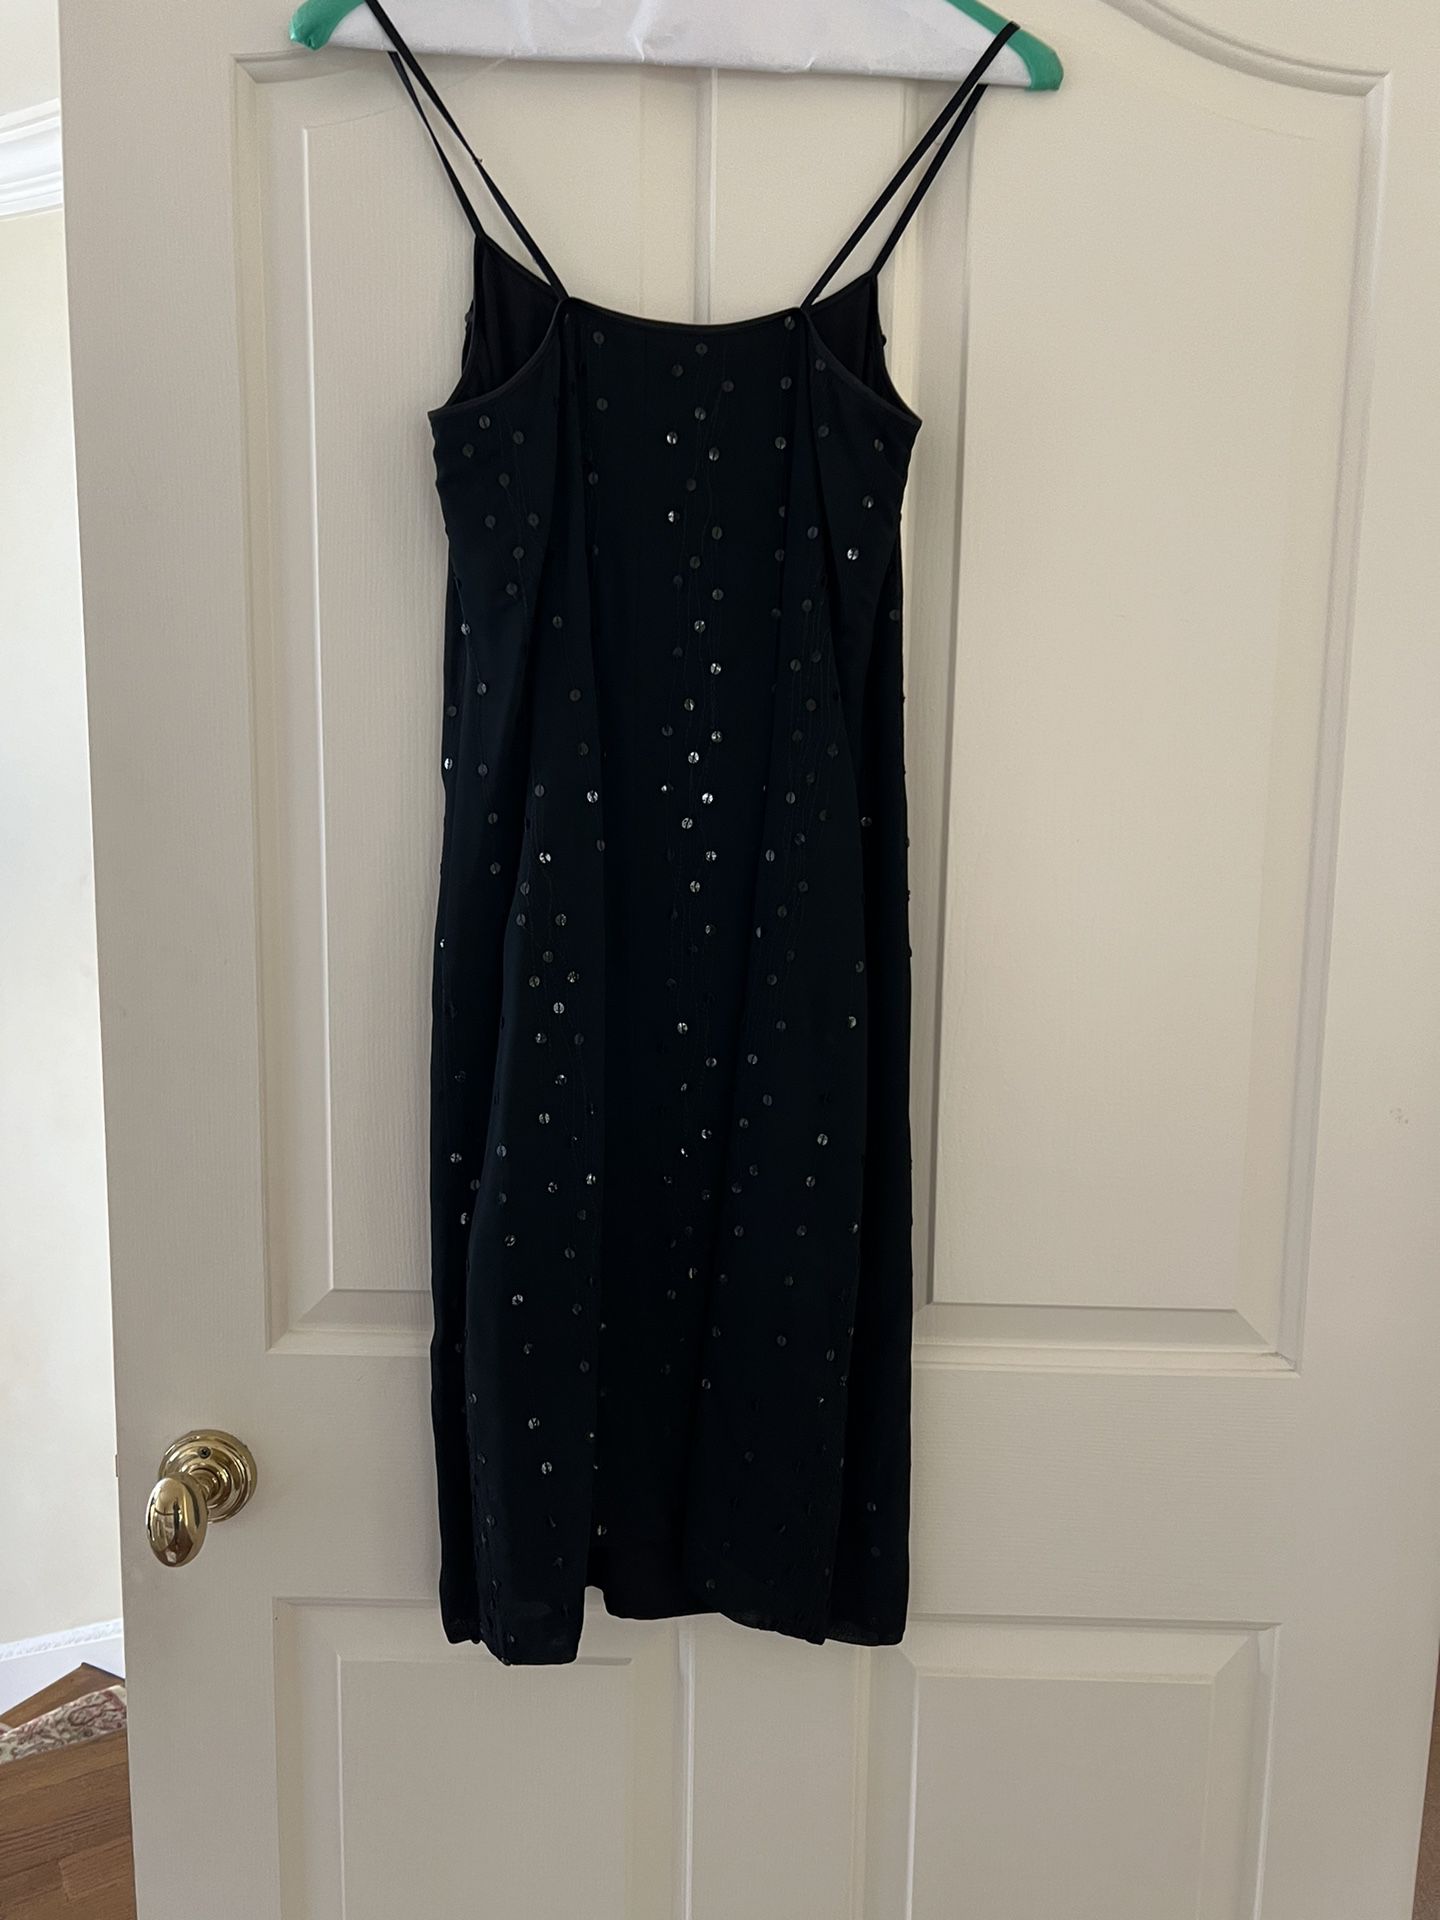 Vintage Australian LBD With Sequins - Size S